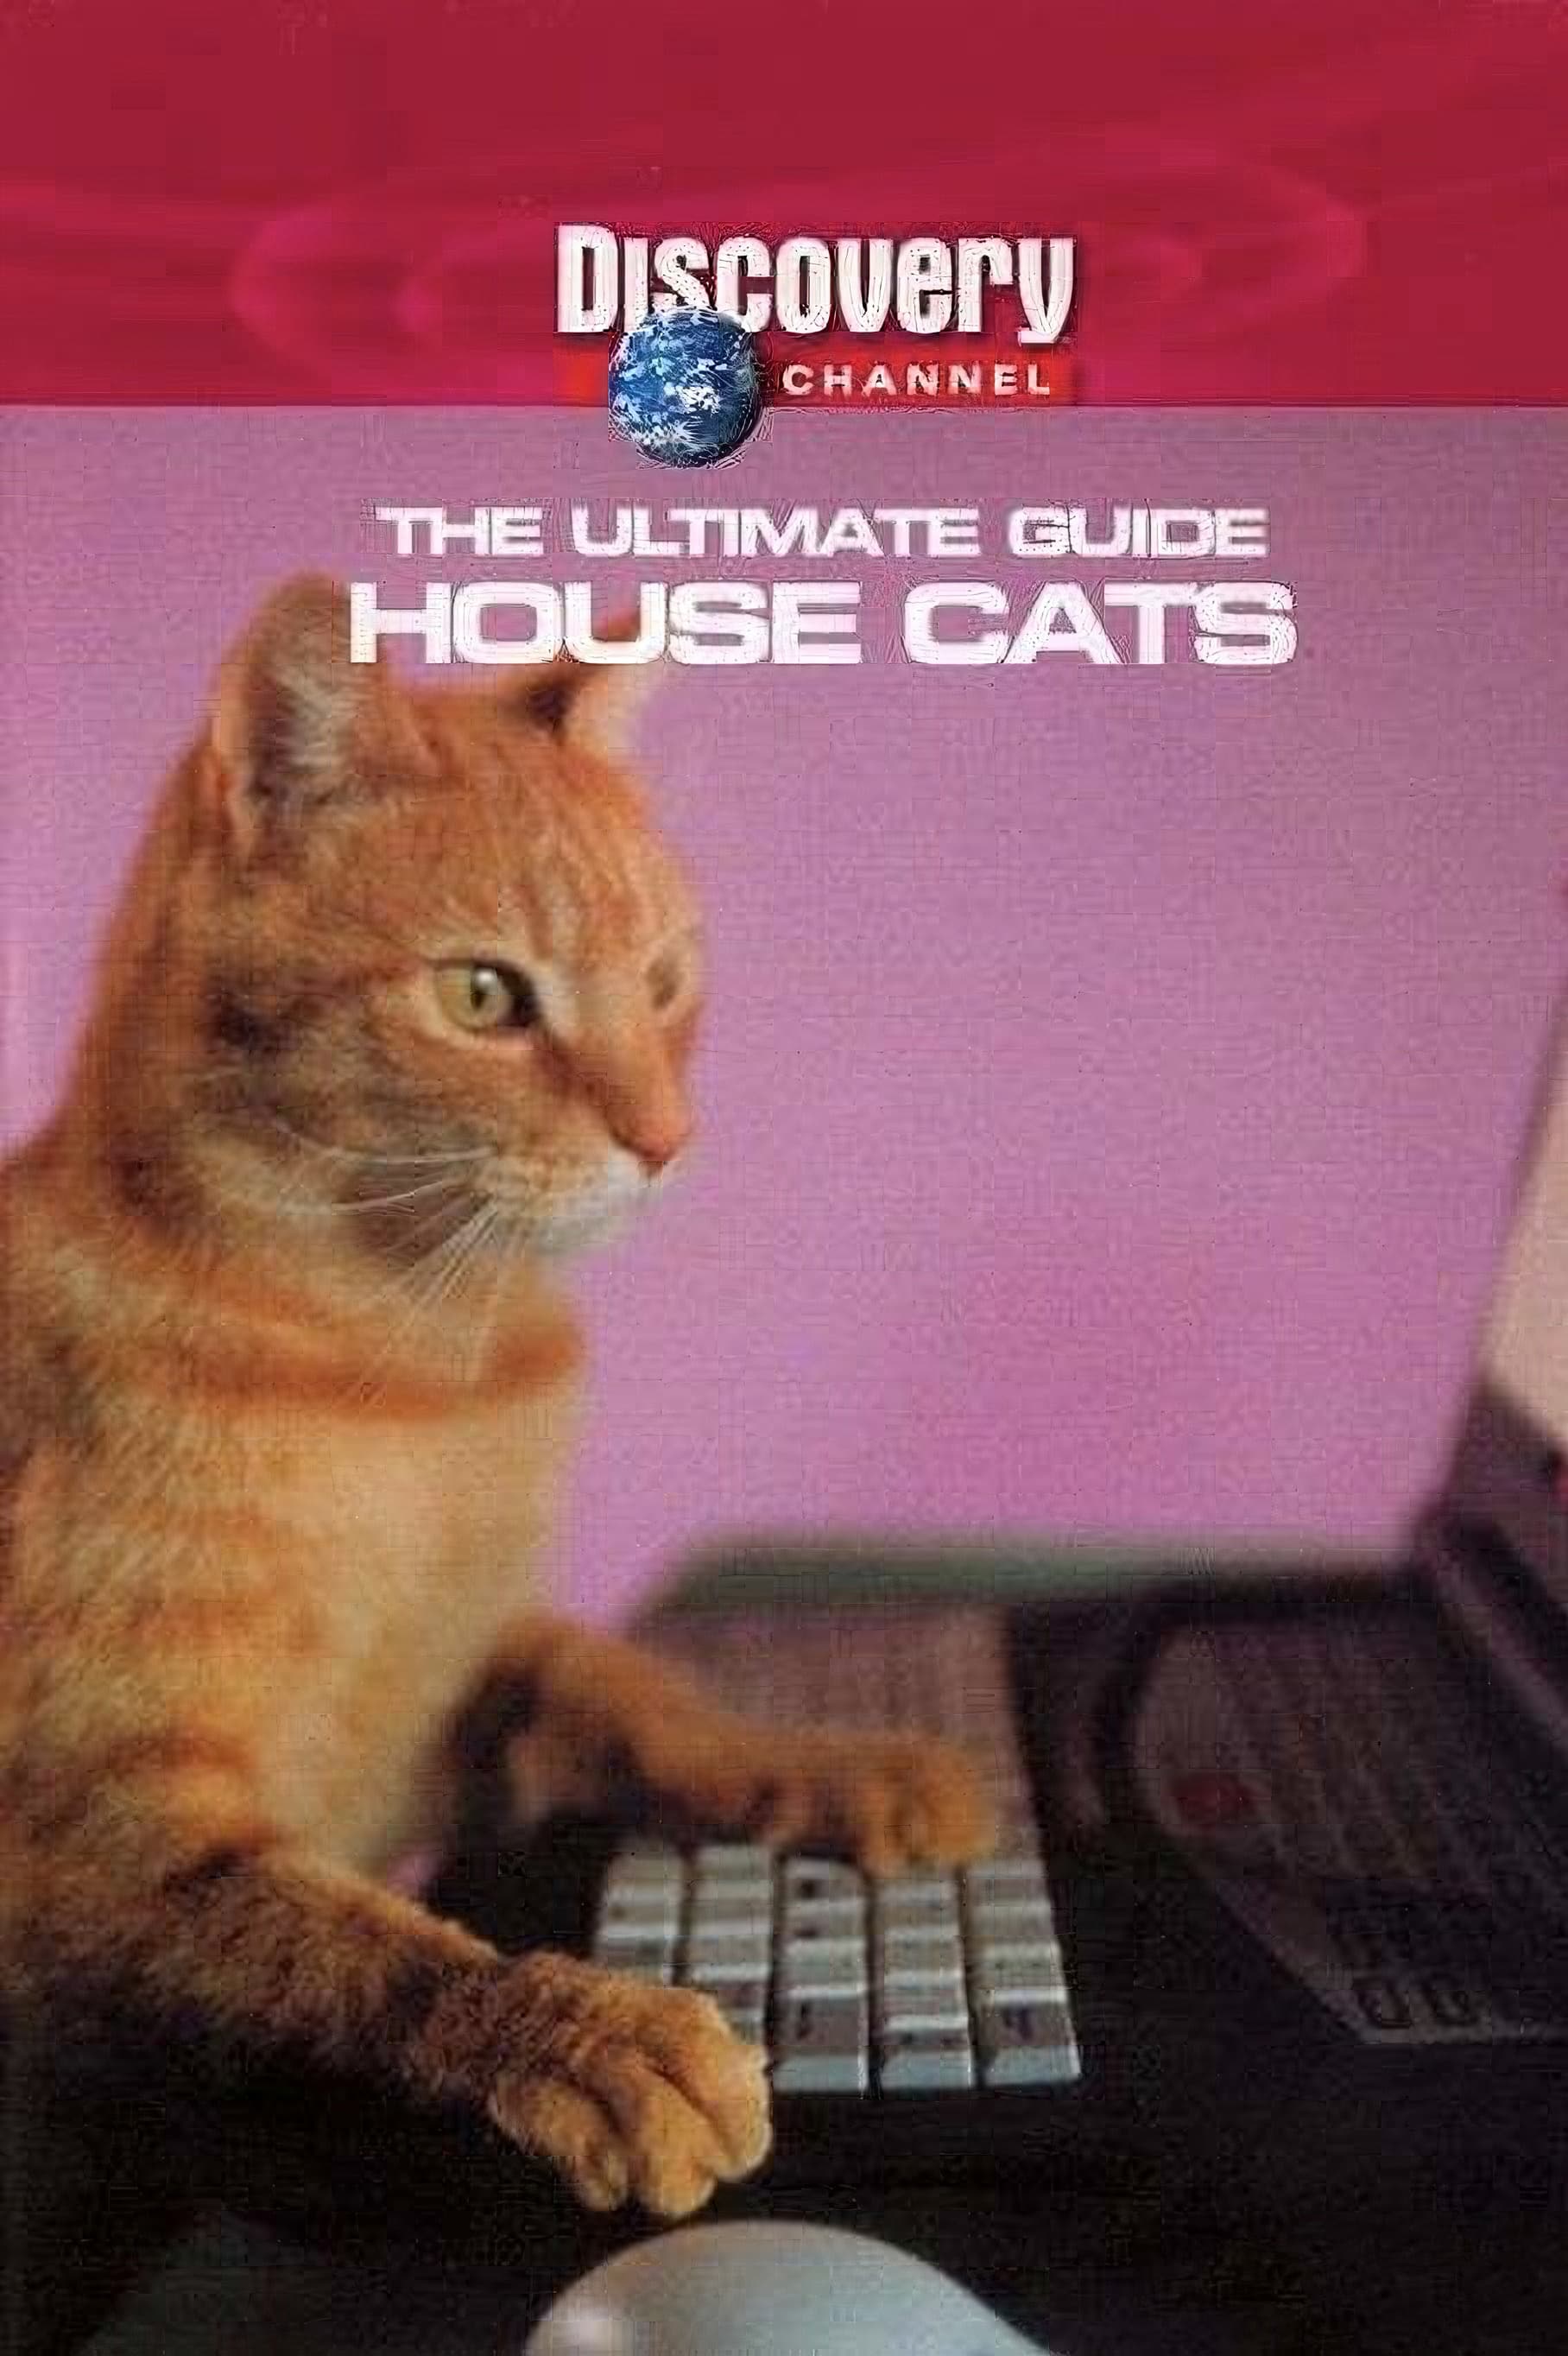 The Ultimate Guide: House Cats